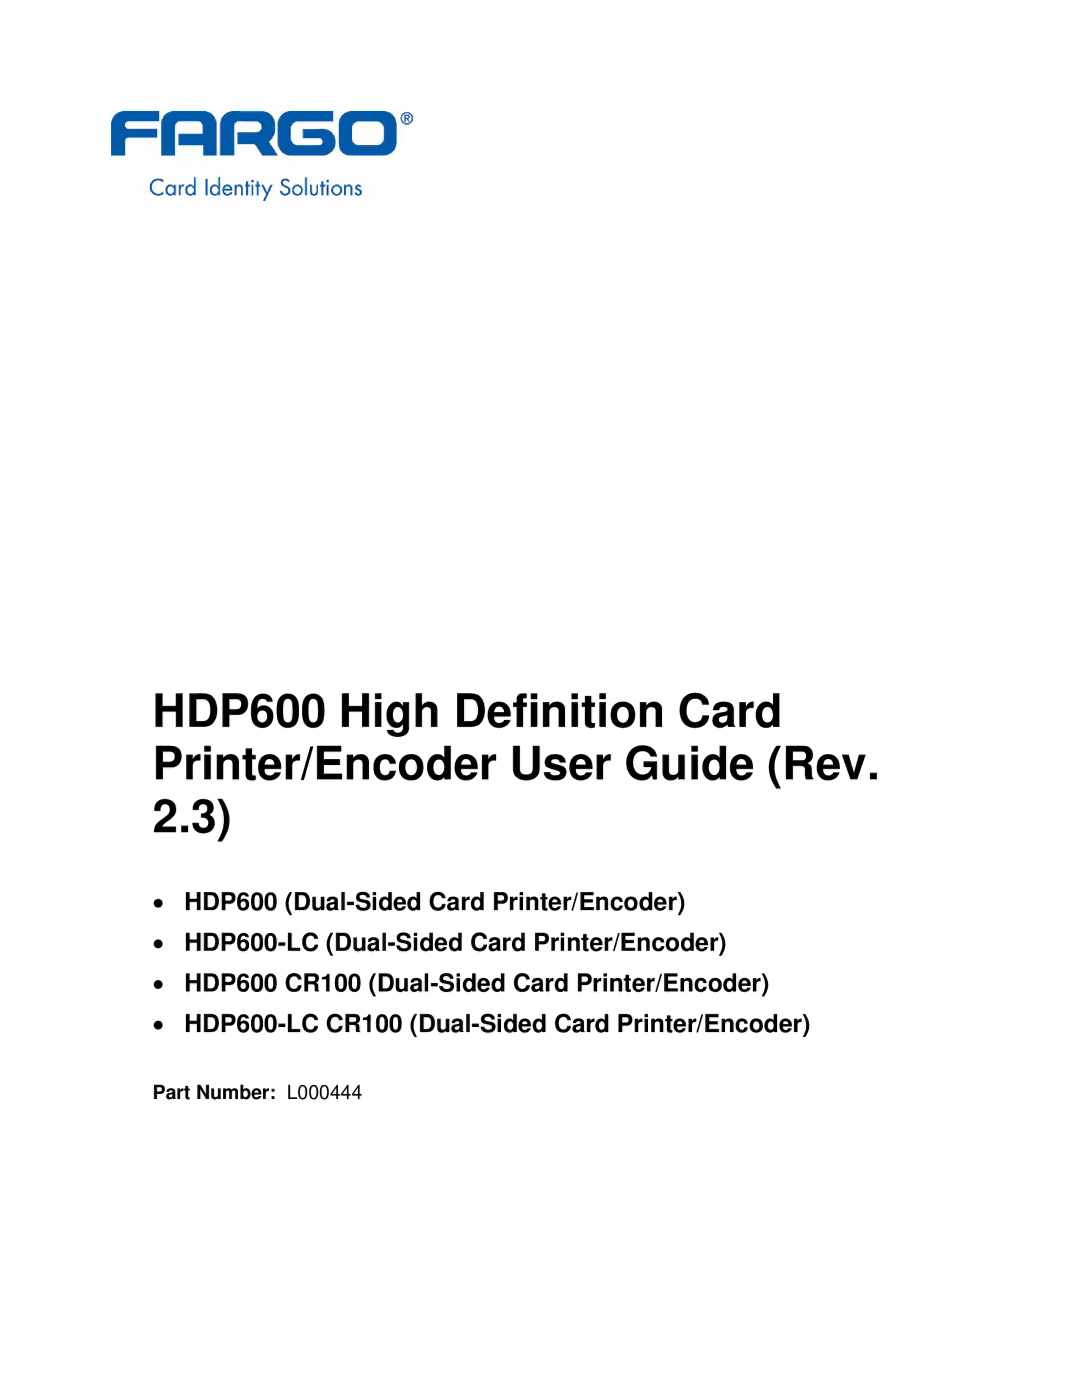 FARGO electronic HDP600-LC manual HDP600 High Definition Card Printer/Encoder User Guide Rev, Part Number L000444 